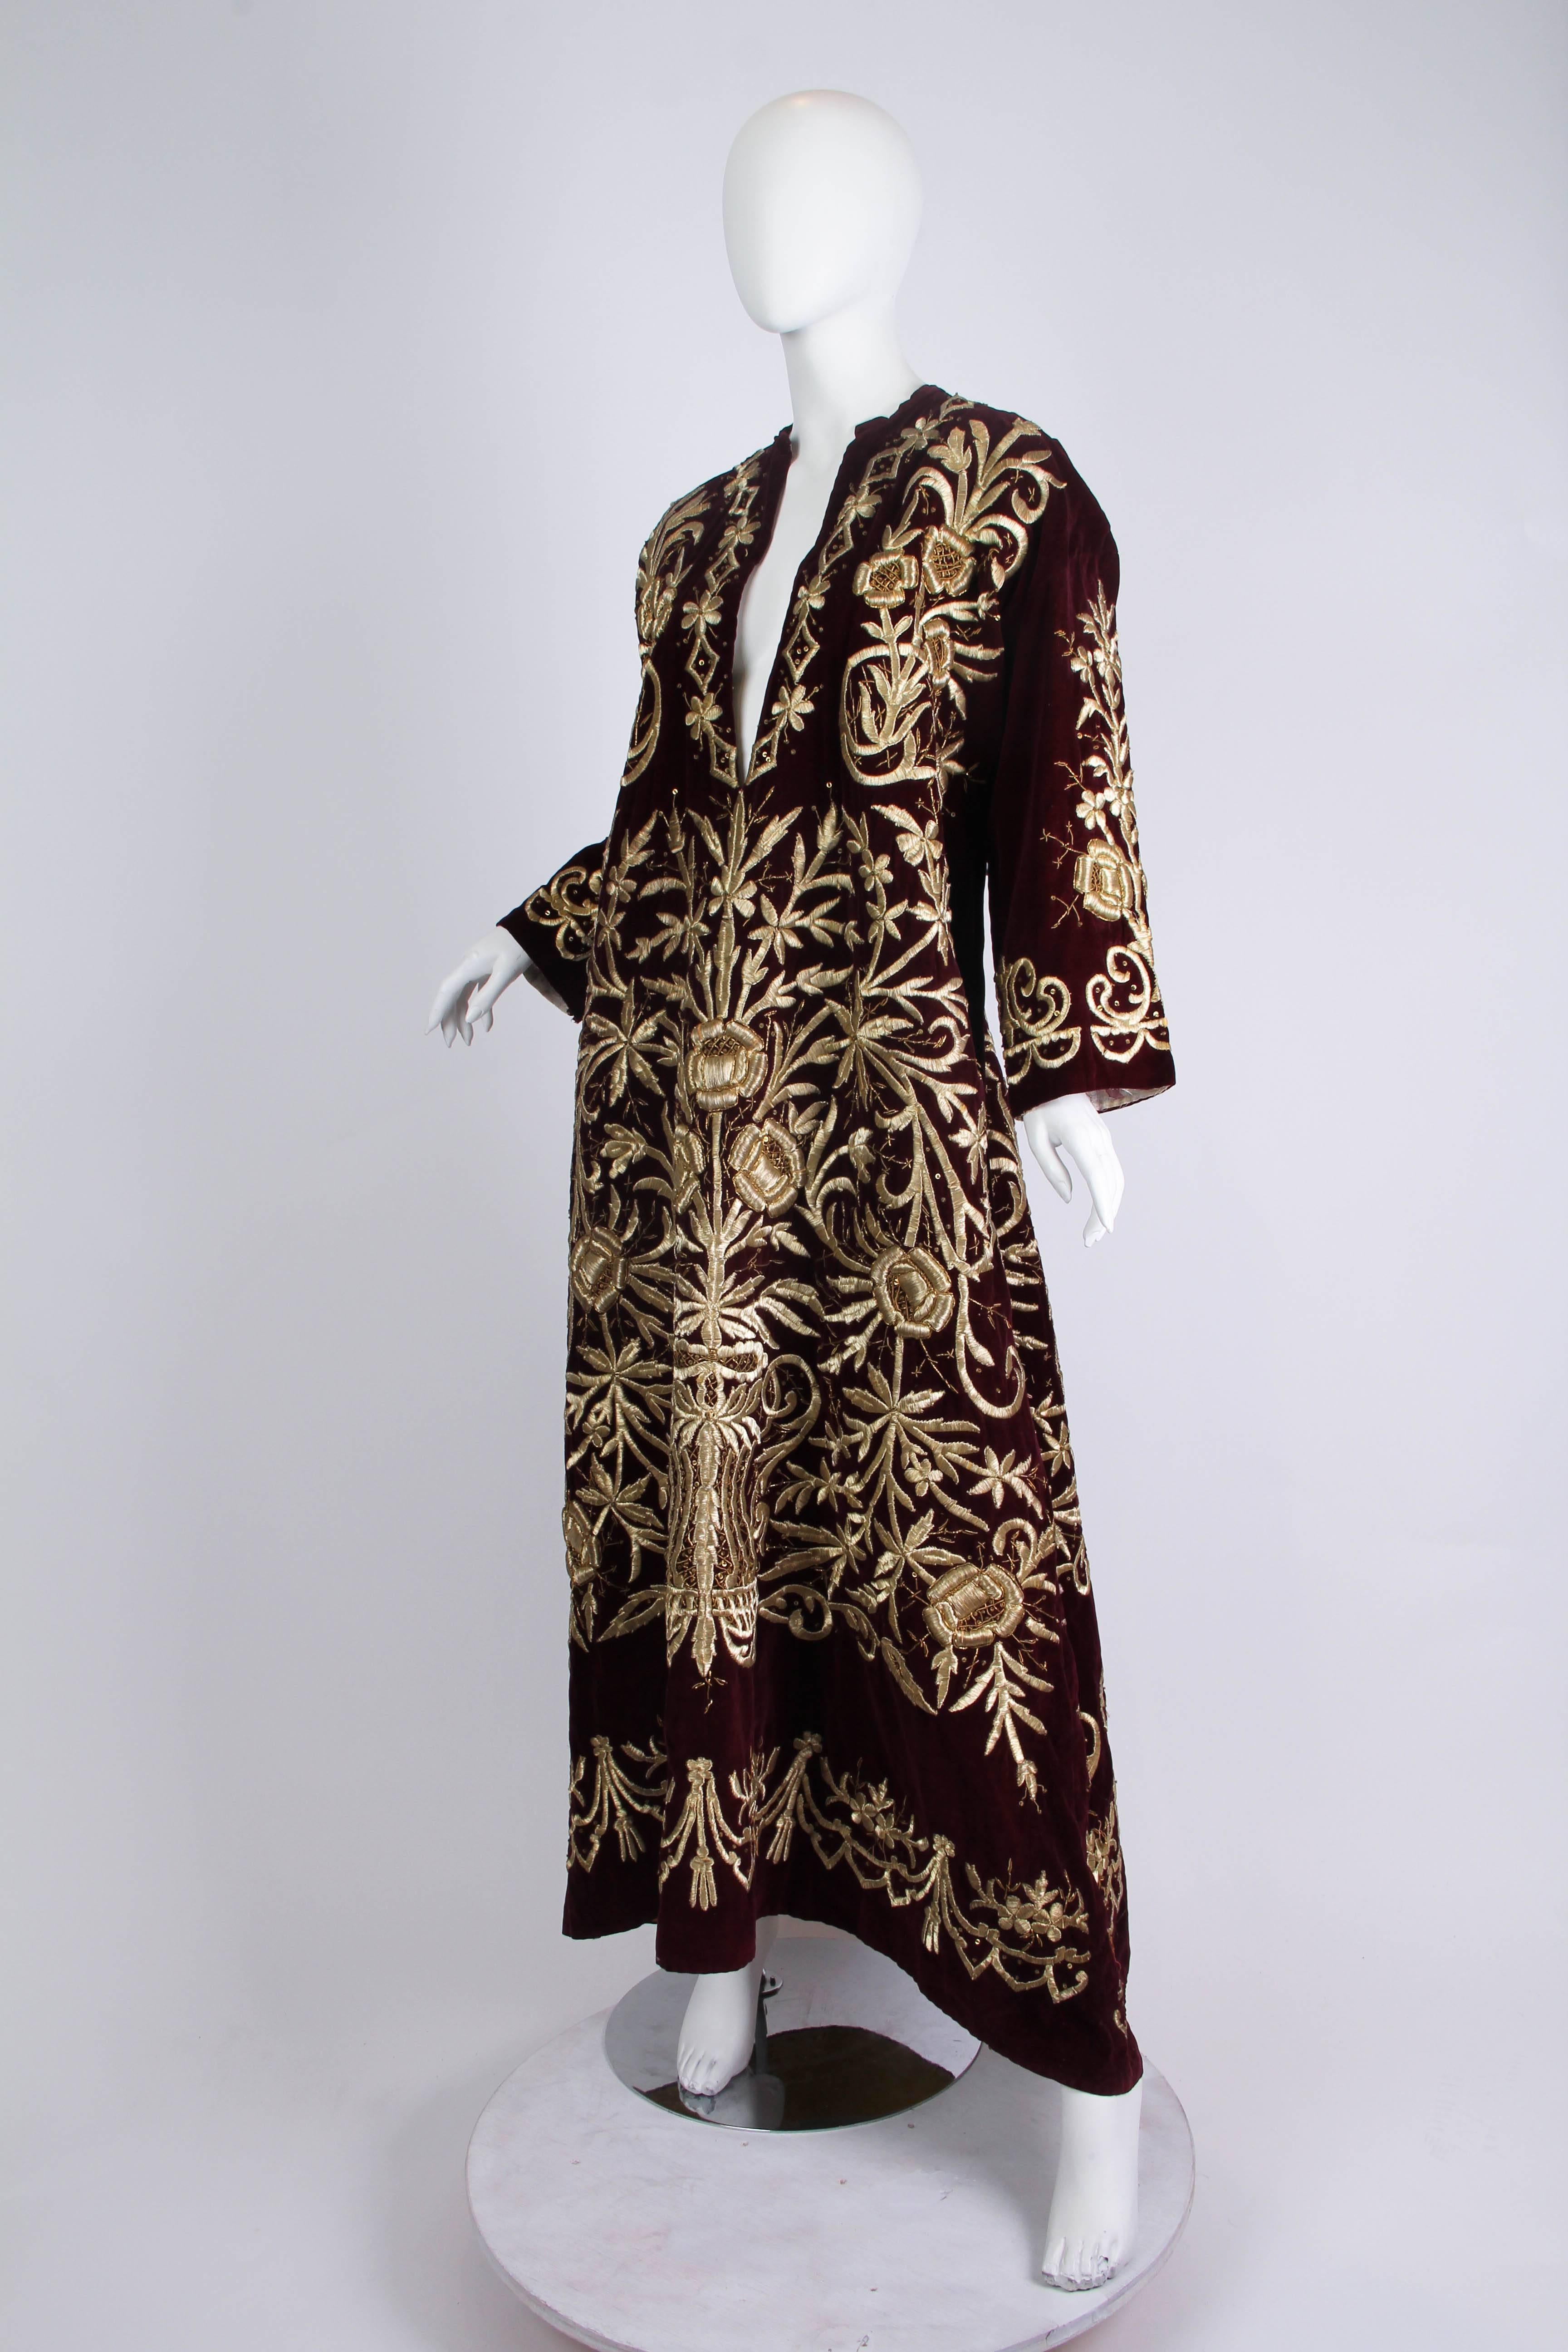 Worn primarily by upper-class women in Aleppo and Damascus, this style of richly embroidered cotton-velvet dress exhibits both European and Ottoman influences. The exquisite embroidery was embellished by professional women in Hama. They used a